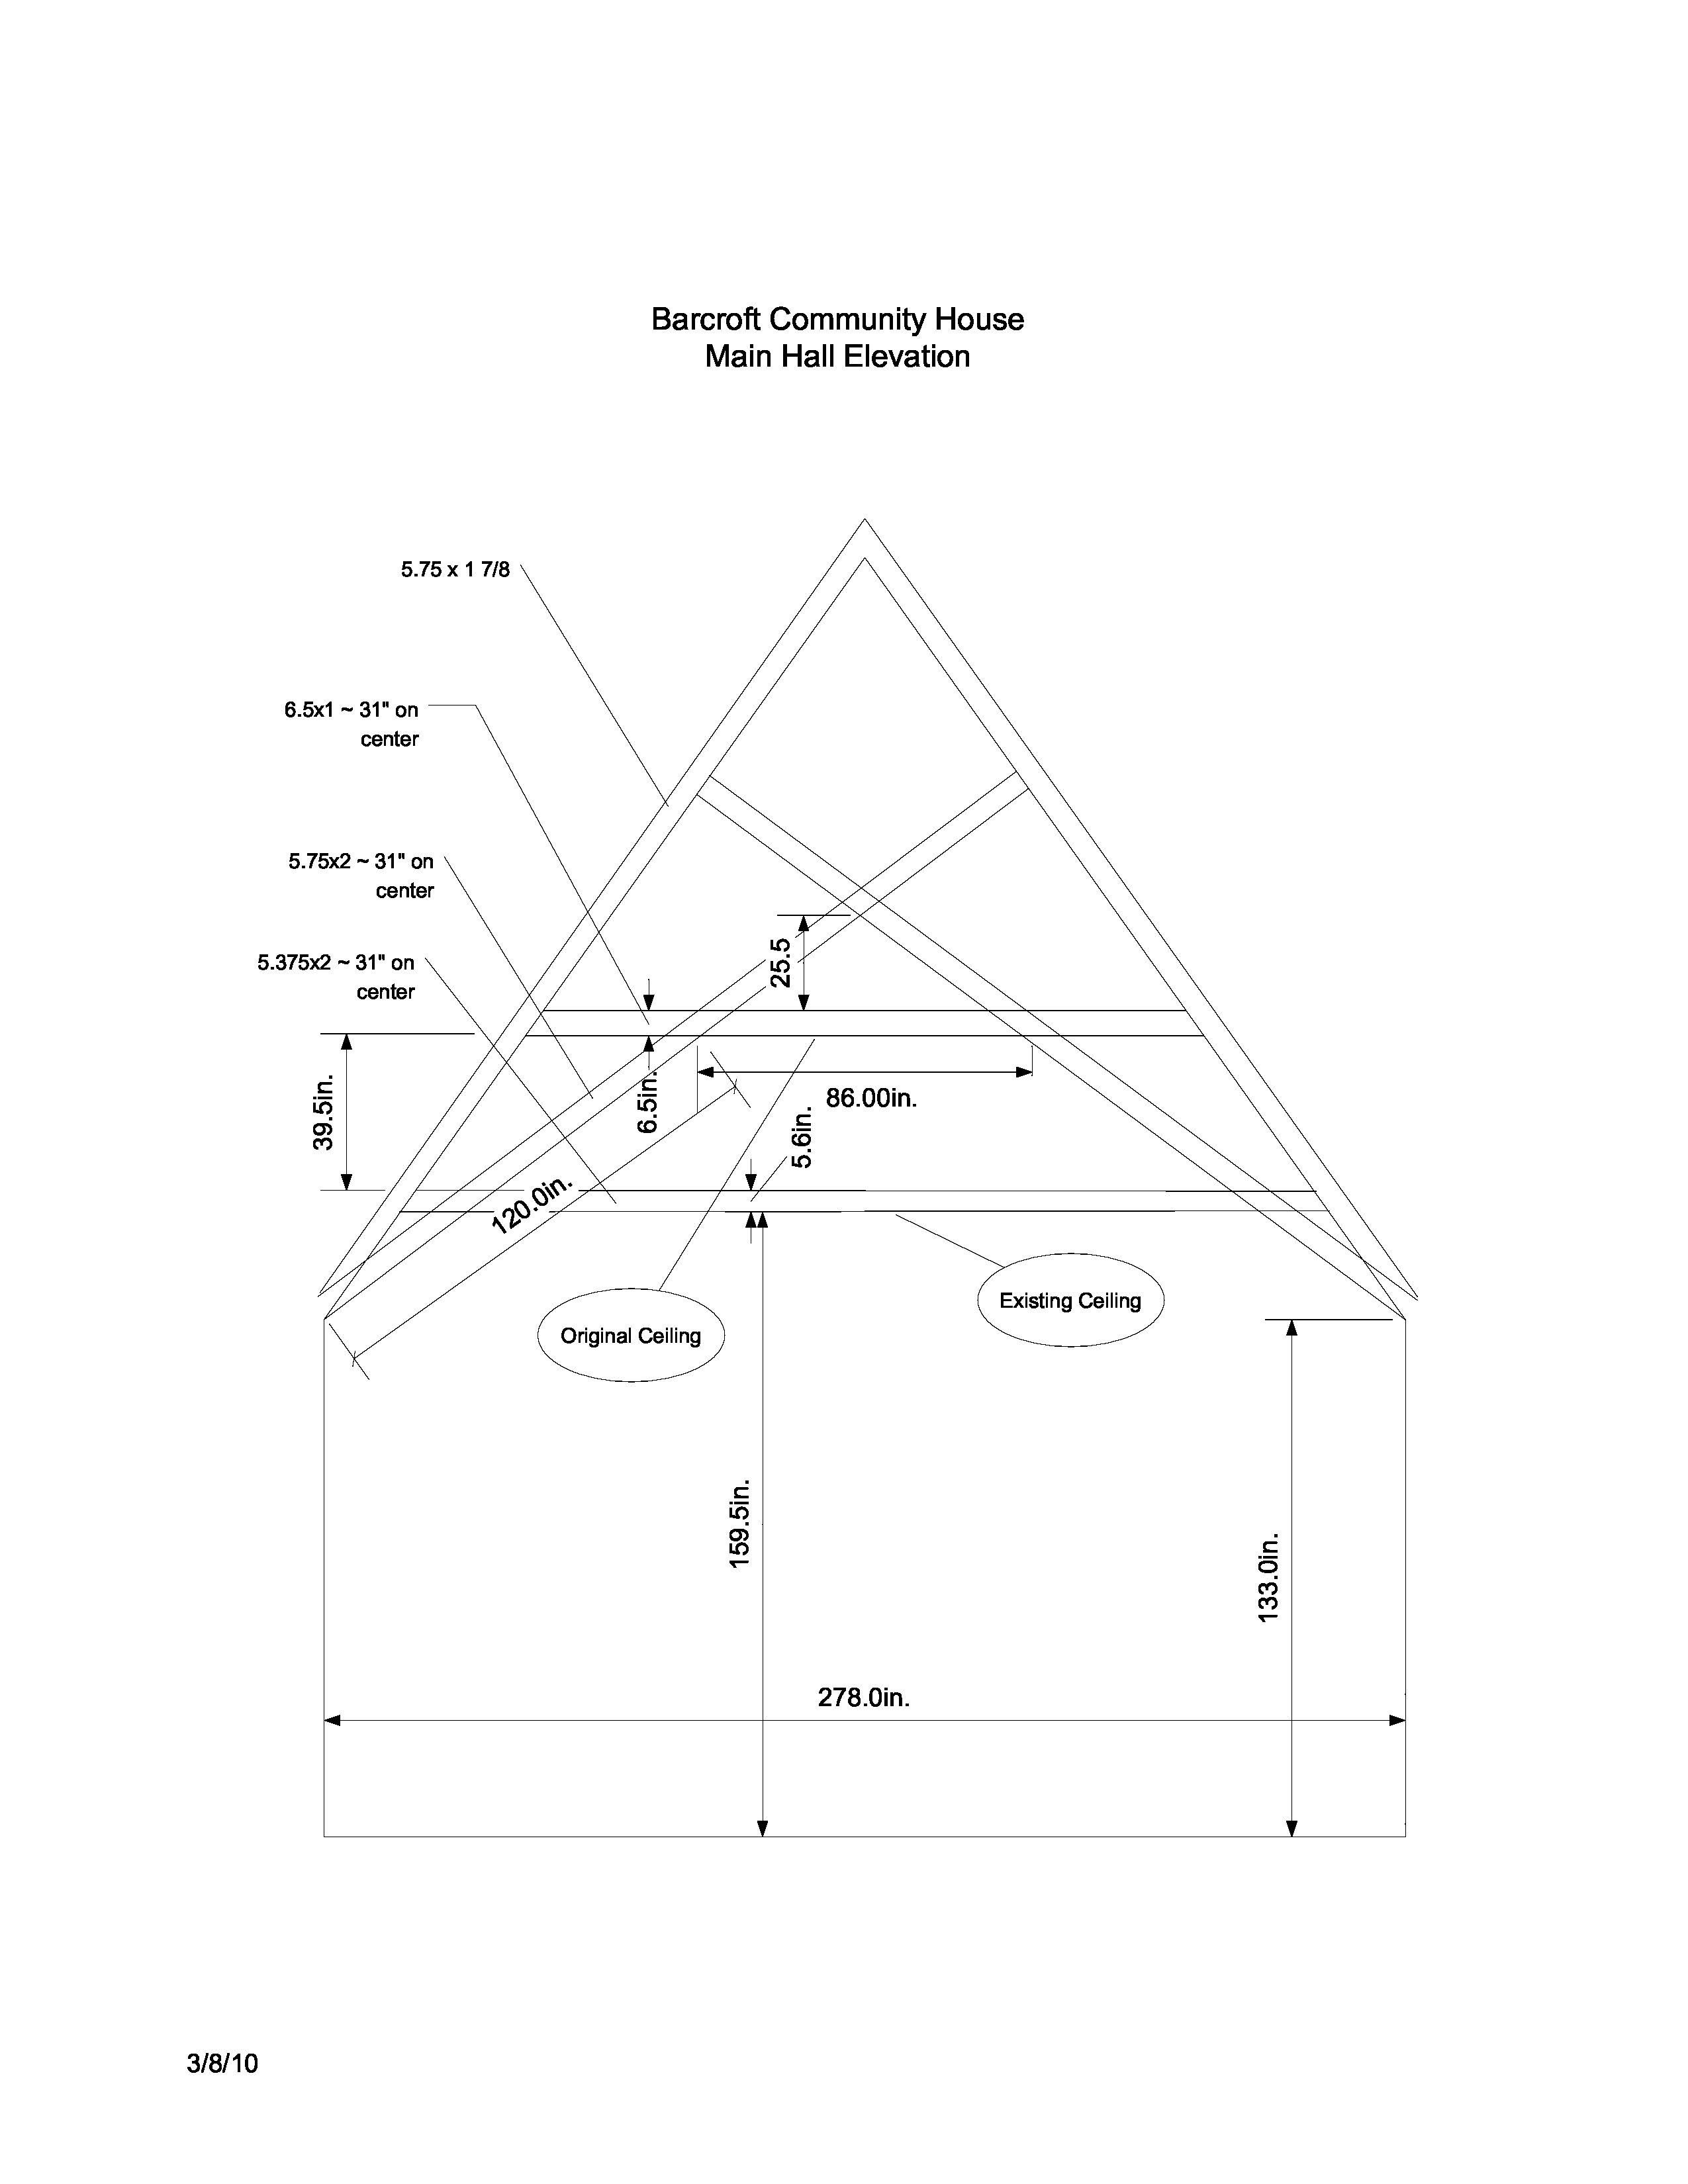 Drawing of the BCH ceiling trusses